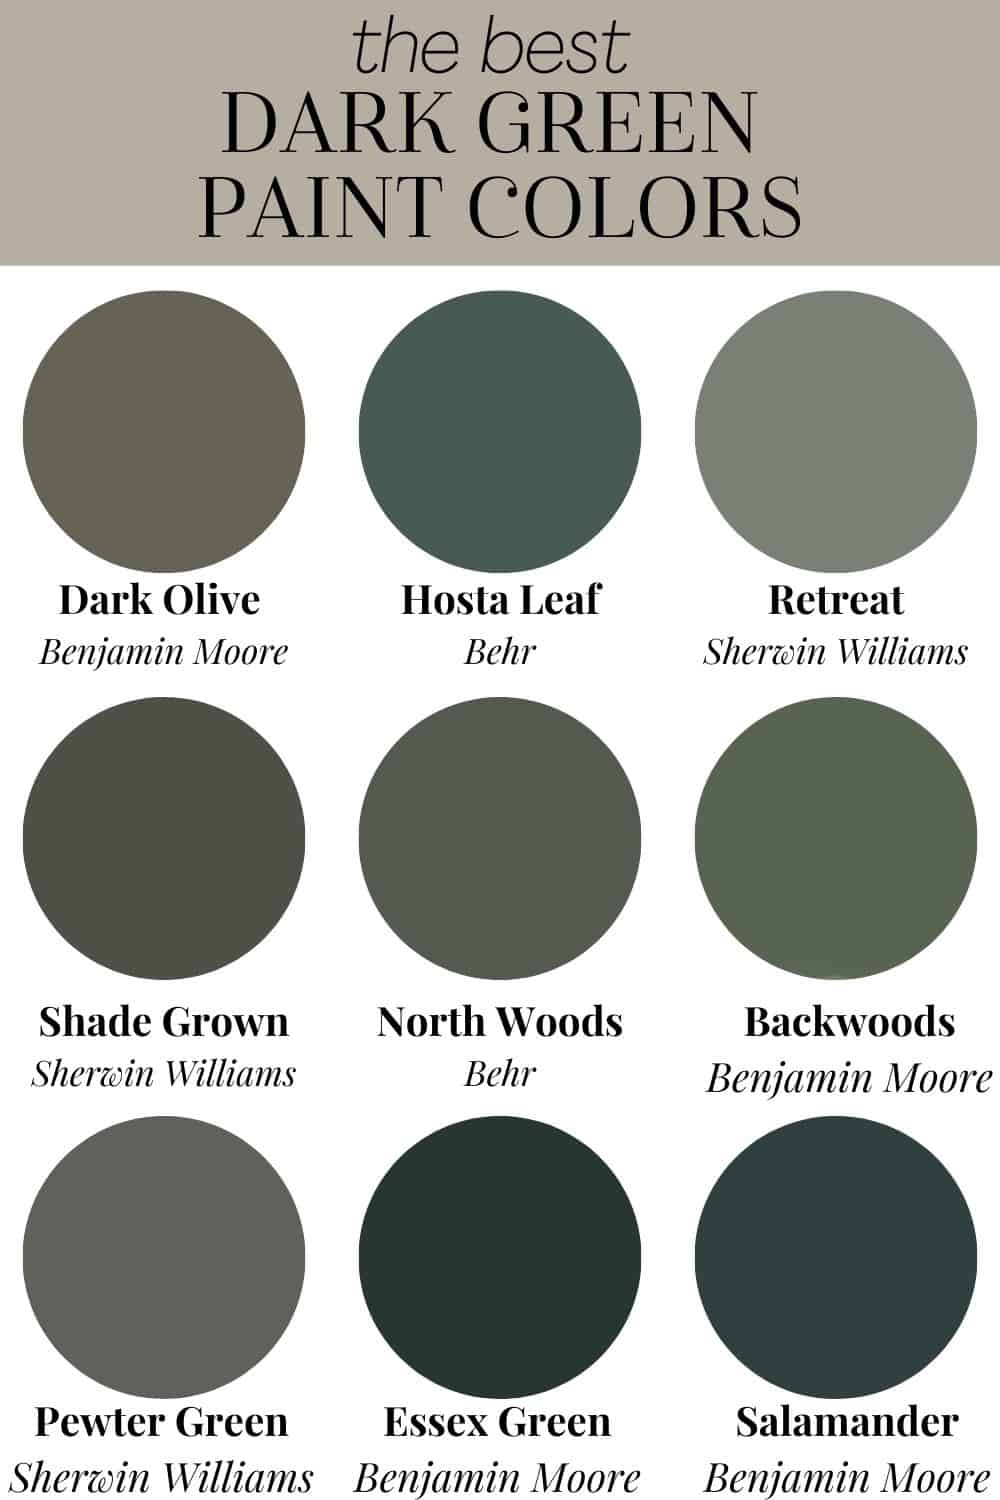 Our Favorite Green Paint Colors for Interiors